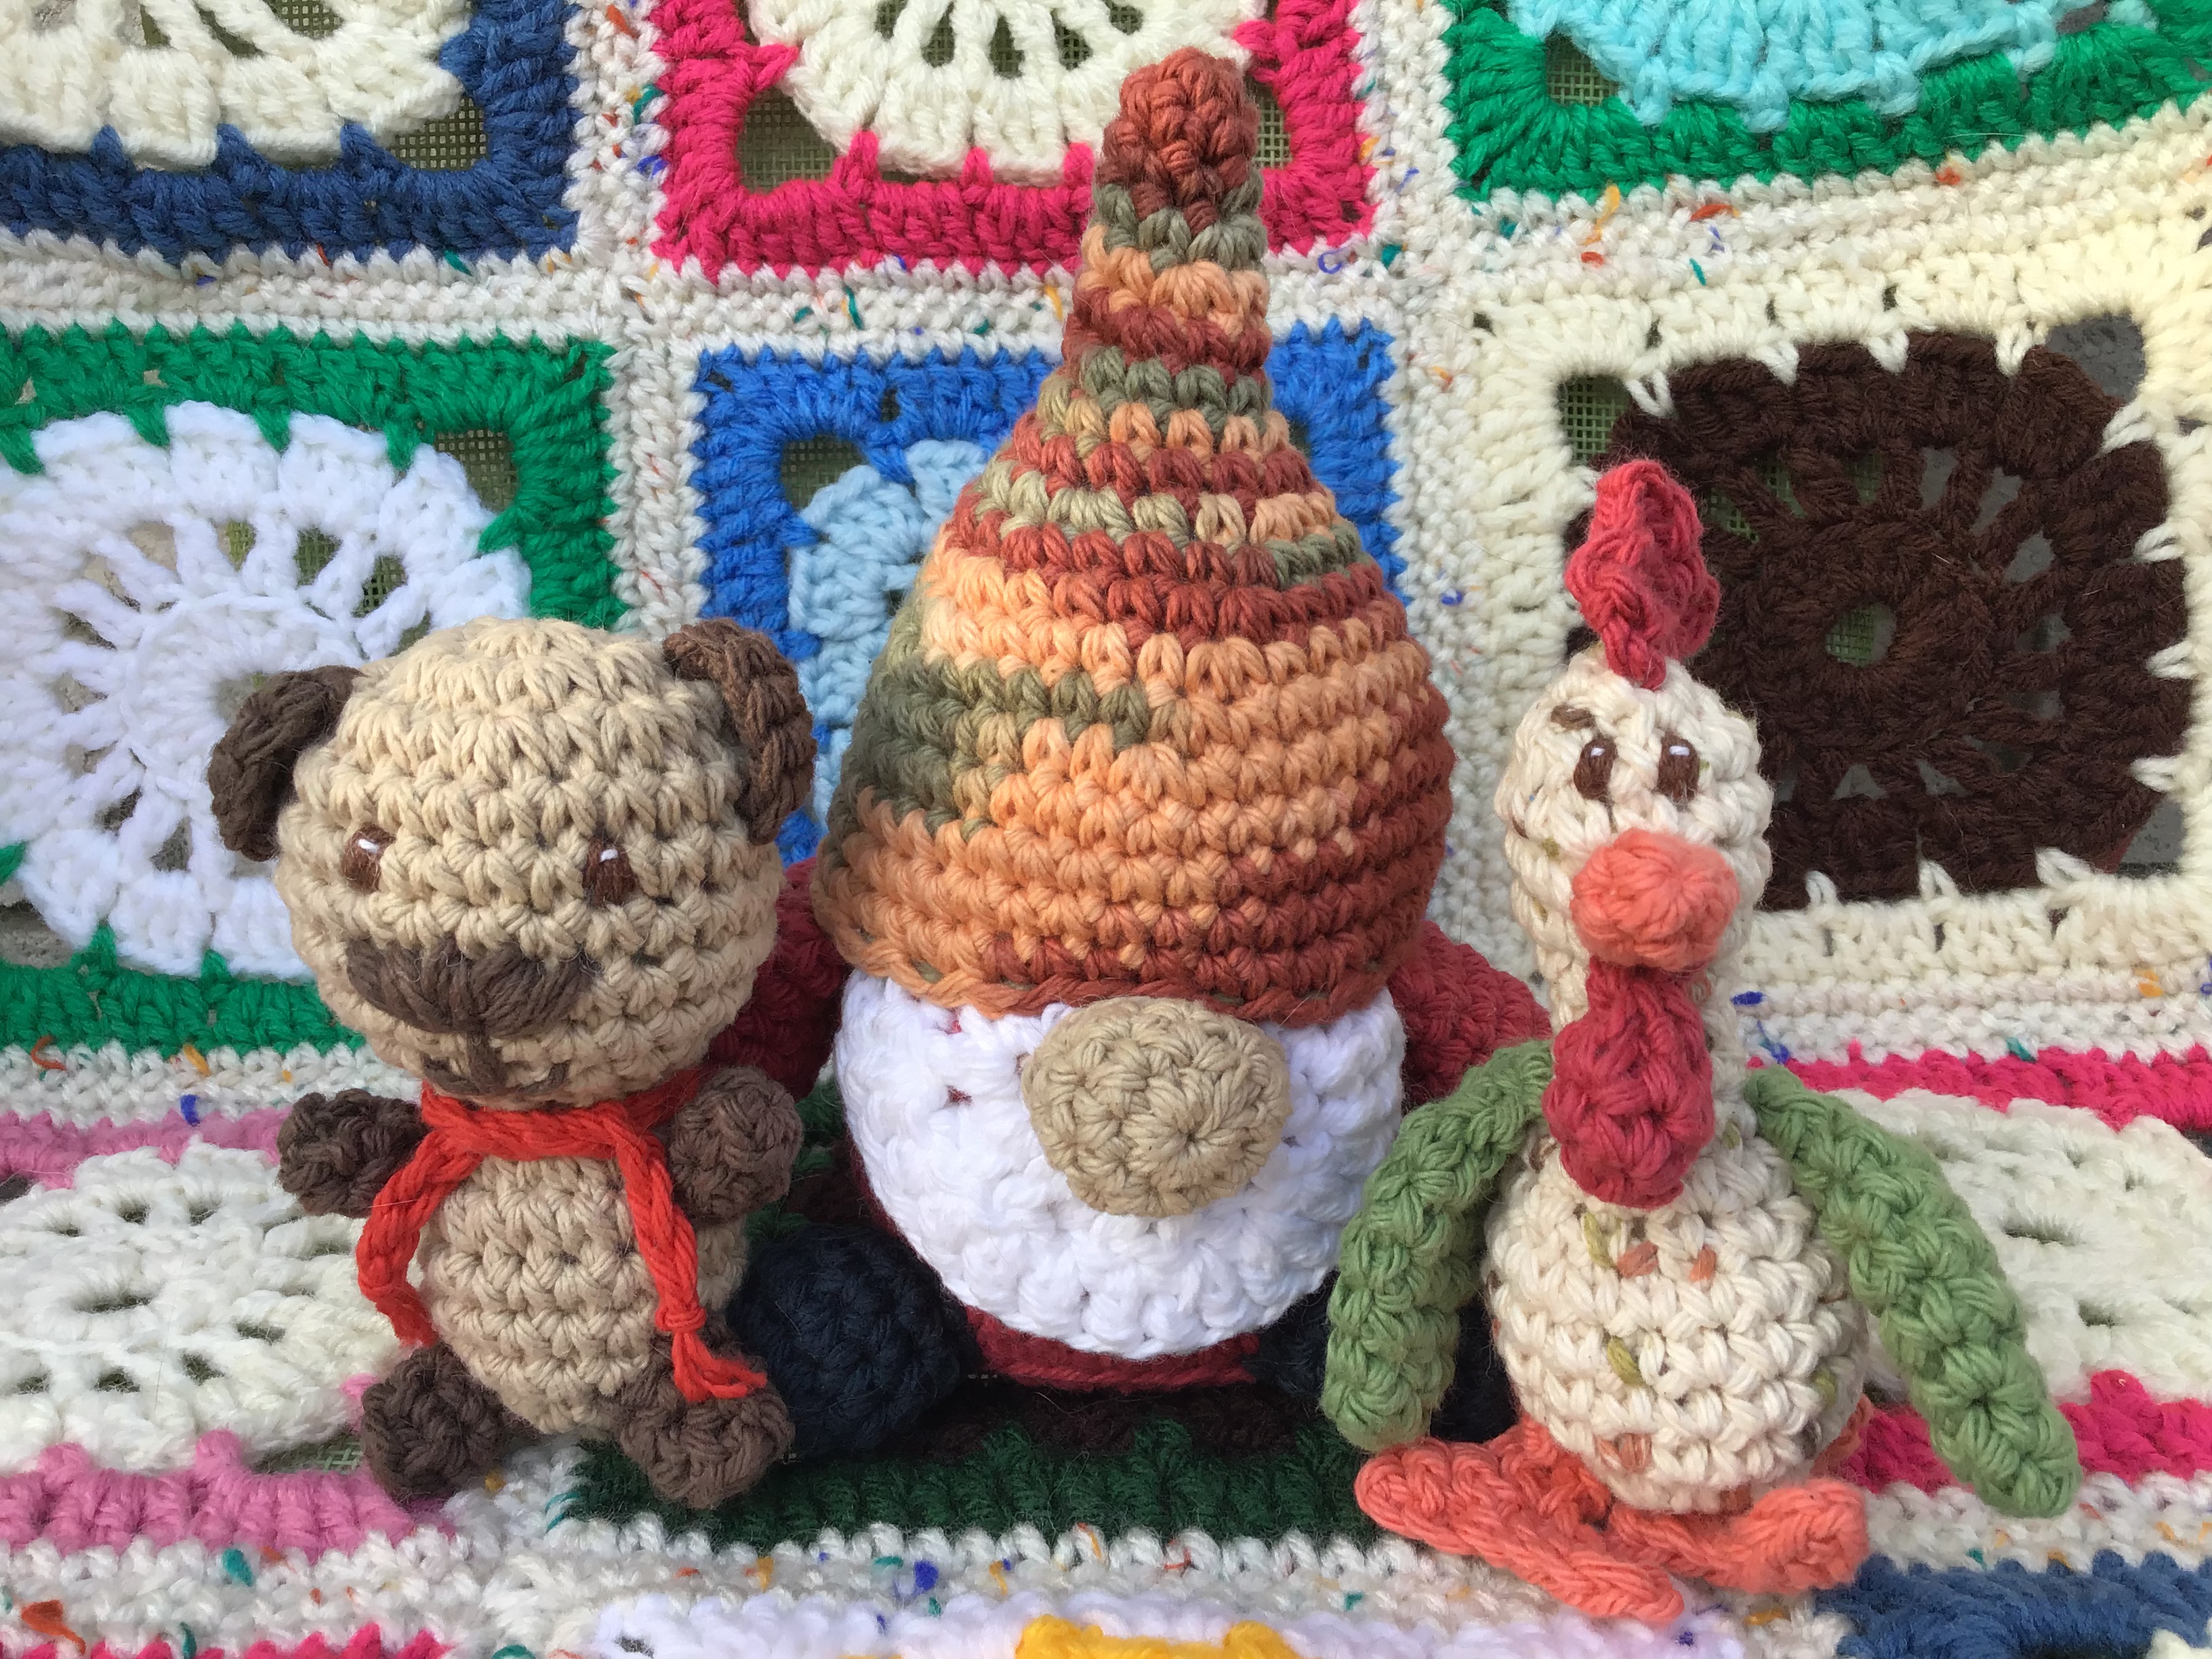 Tiny teddy, medium gnome, and tiny rooster crocheted stuffed toys